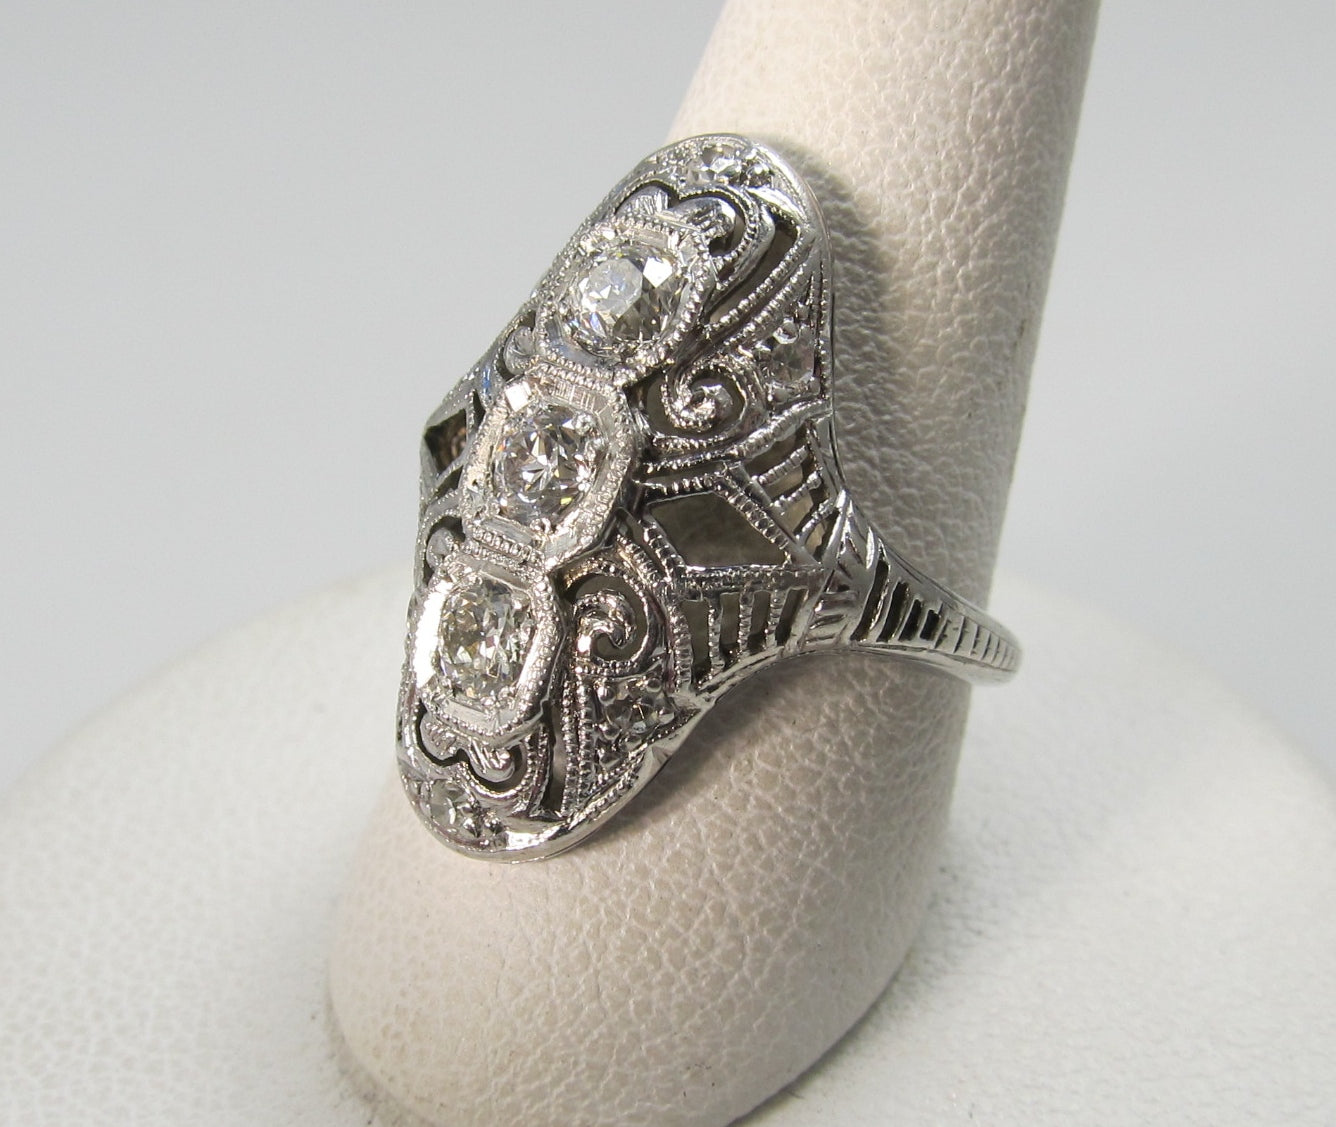 Platinum & 18k long filigree ring with .50cts in diamonds, circa 1920